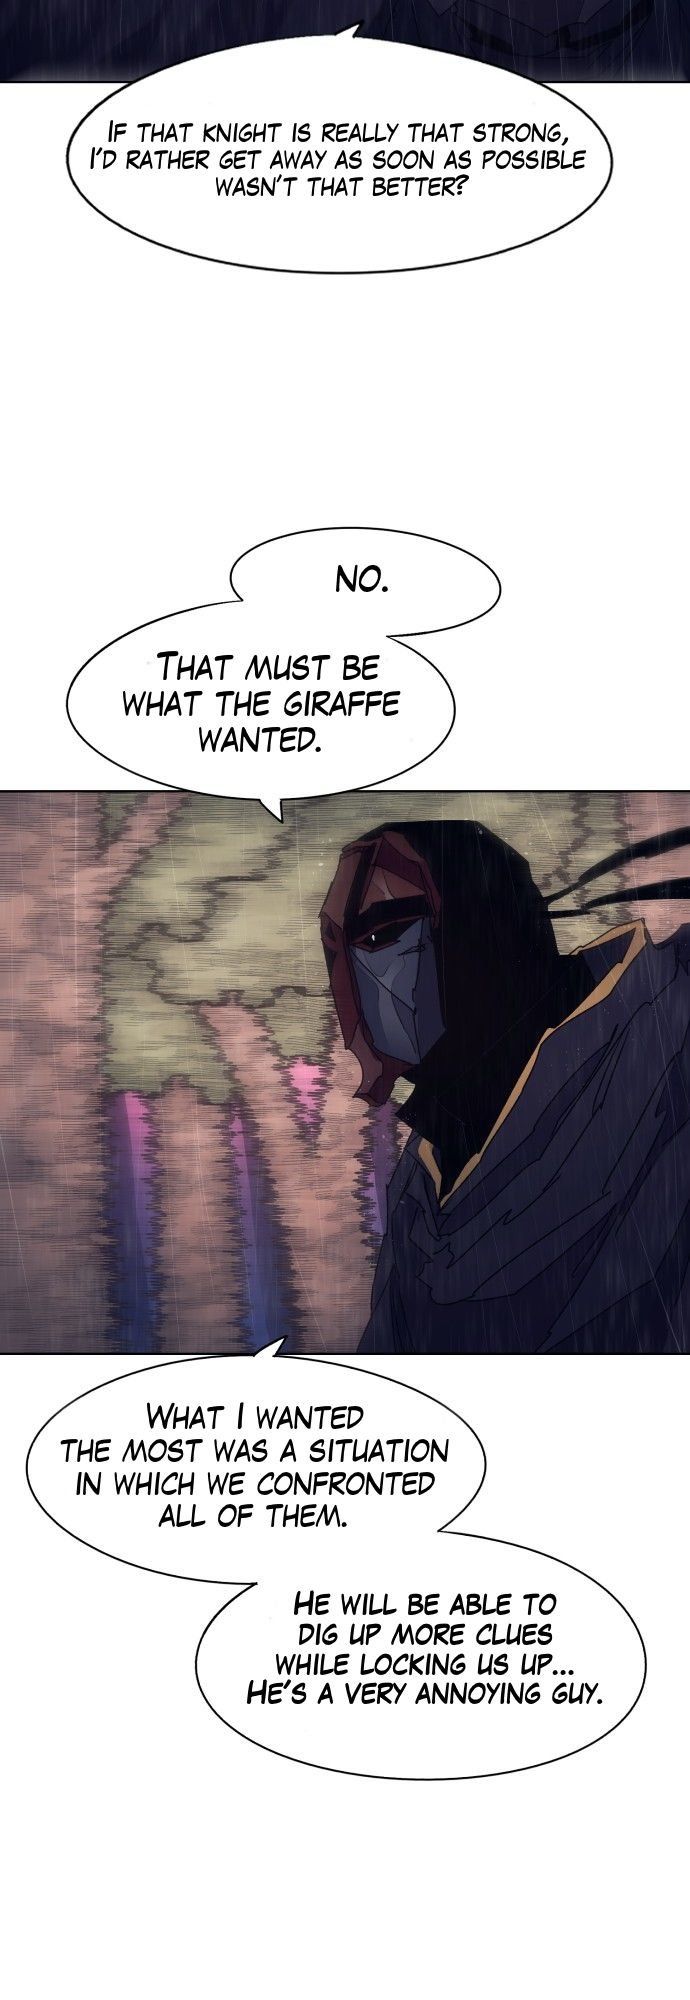 The Knight of Embers Chapter 60 page 3 - MangaWeebs.in